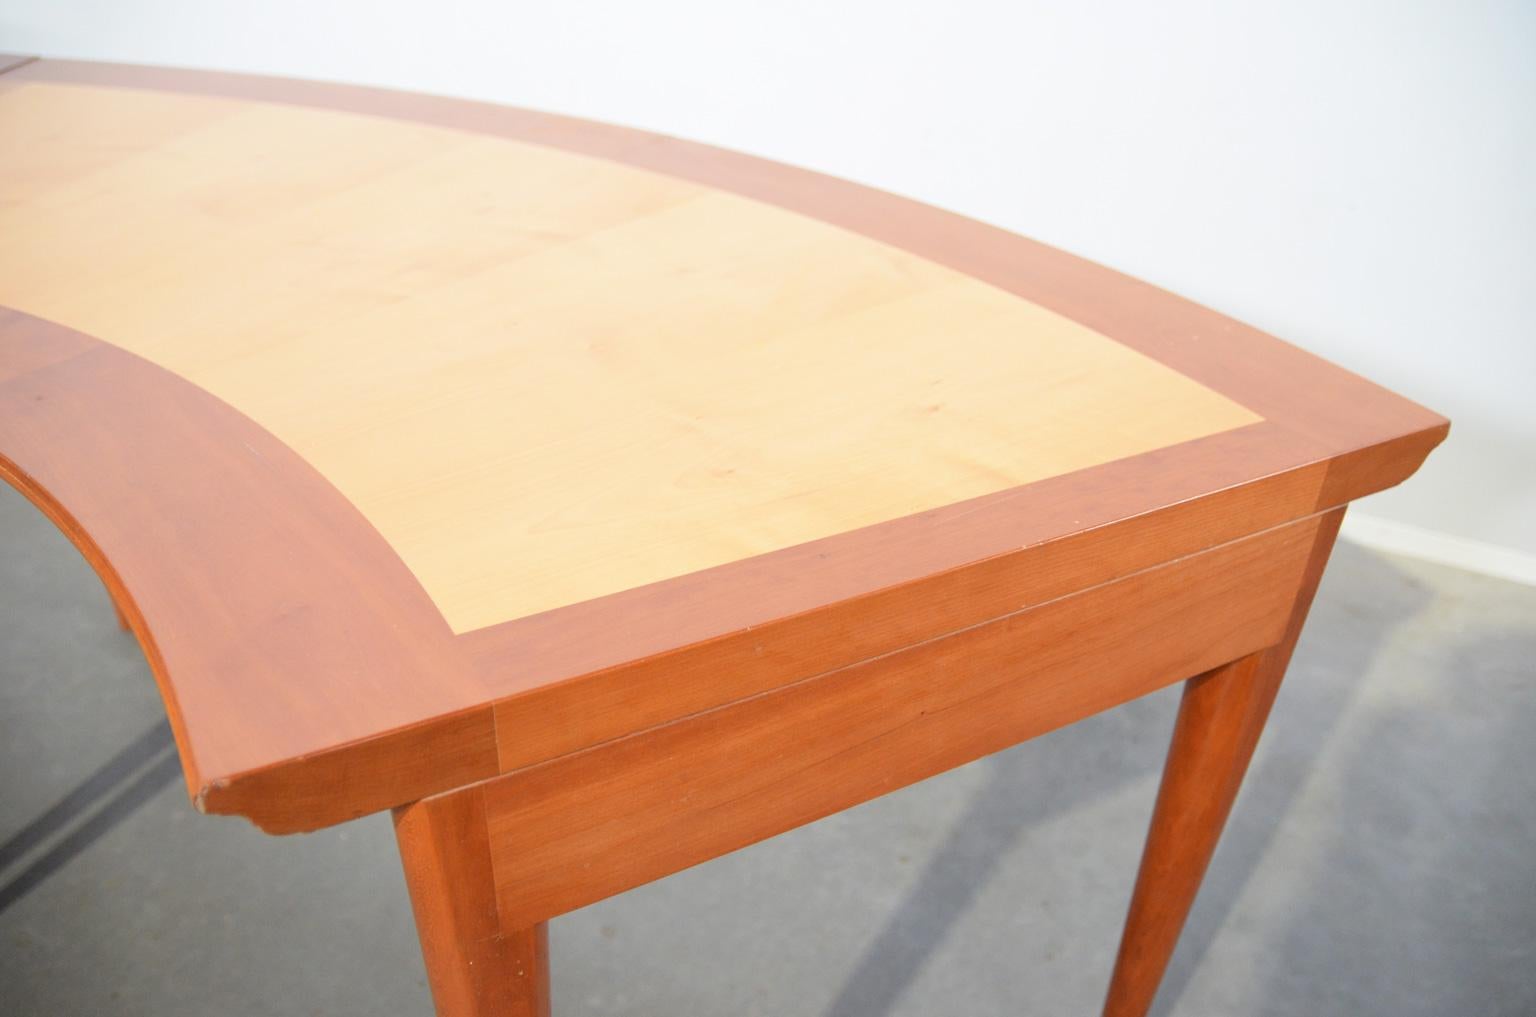 This late 20th century Il Circolo della Tavola table by Adolfo Natalini for Meccani Arredamenti, is made of two different kinds of wood (cherry and pear). The remarkable lines of the table are emphasized bij the cherrywood which is used for the